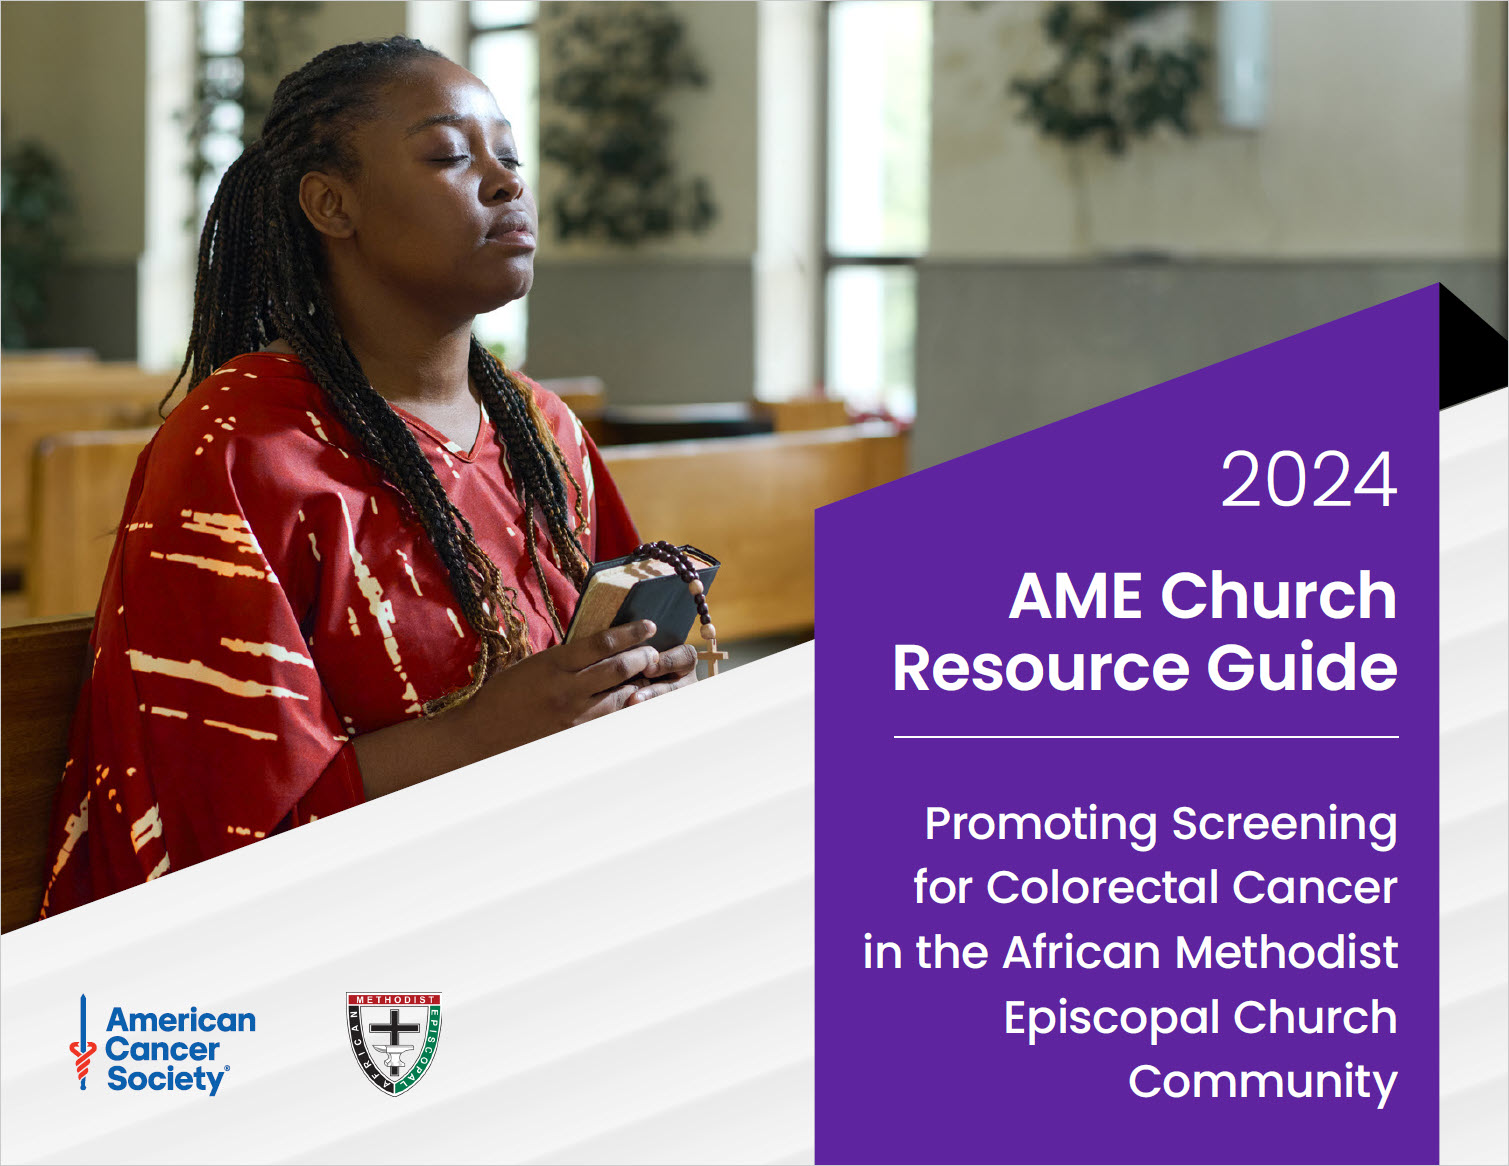 AME Church Resource Guide Cover